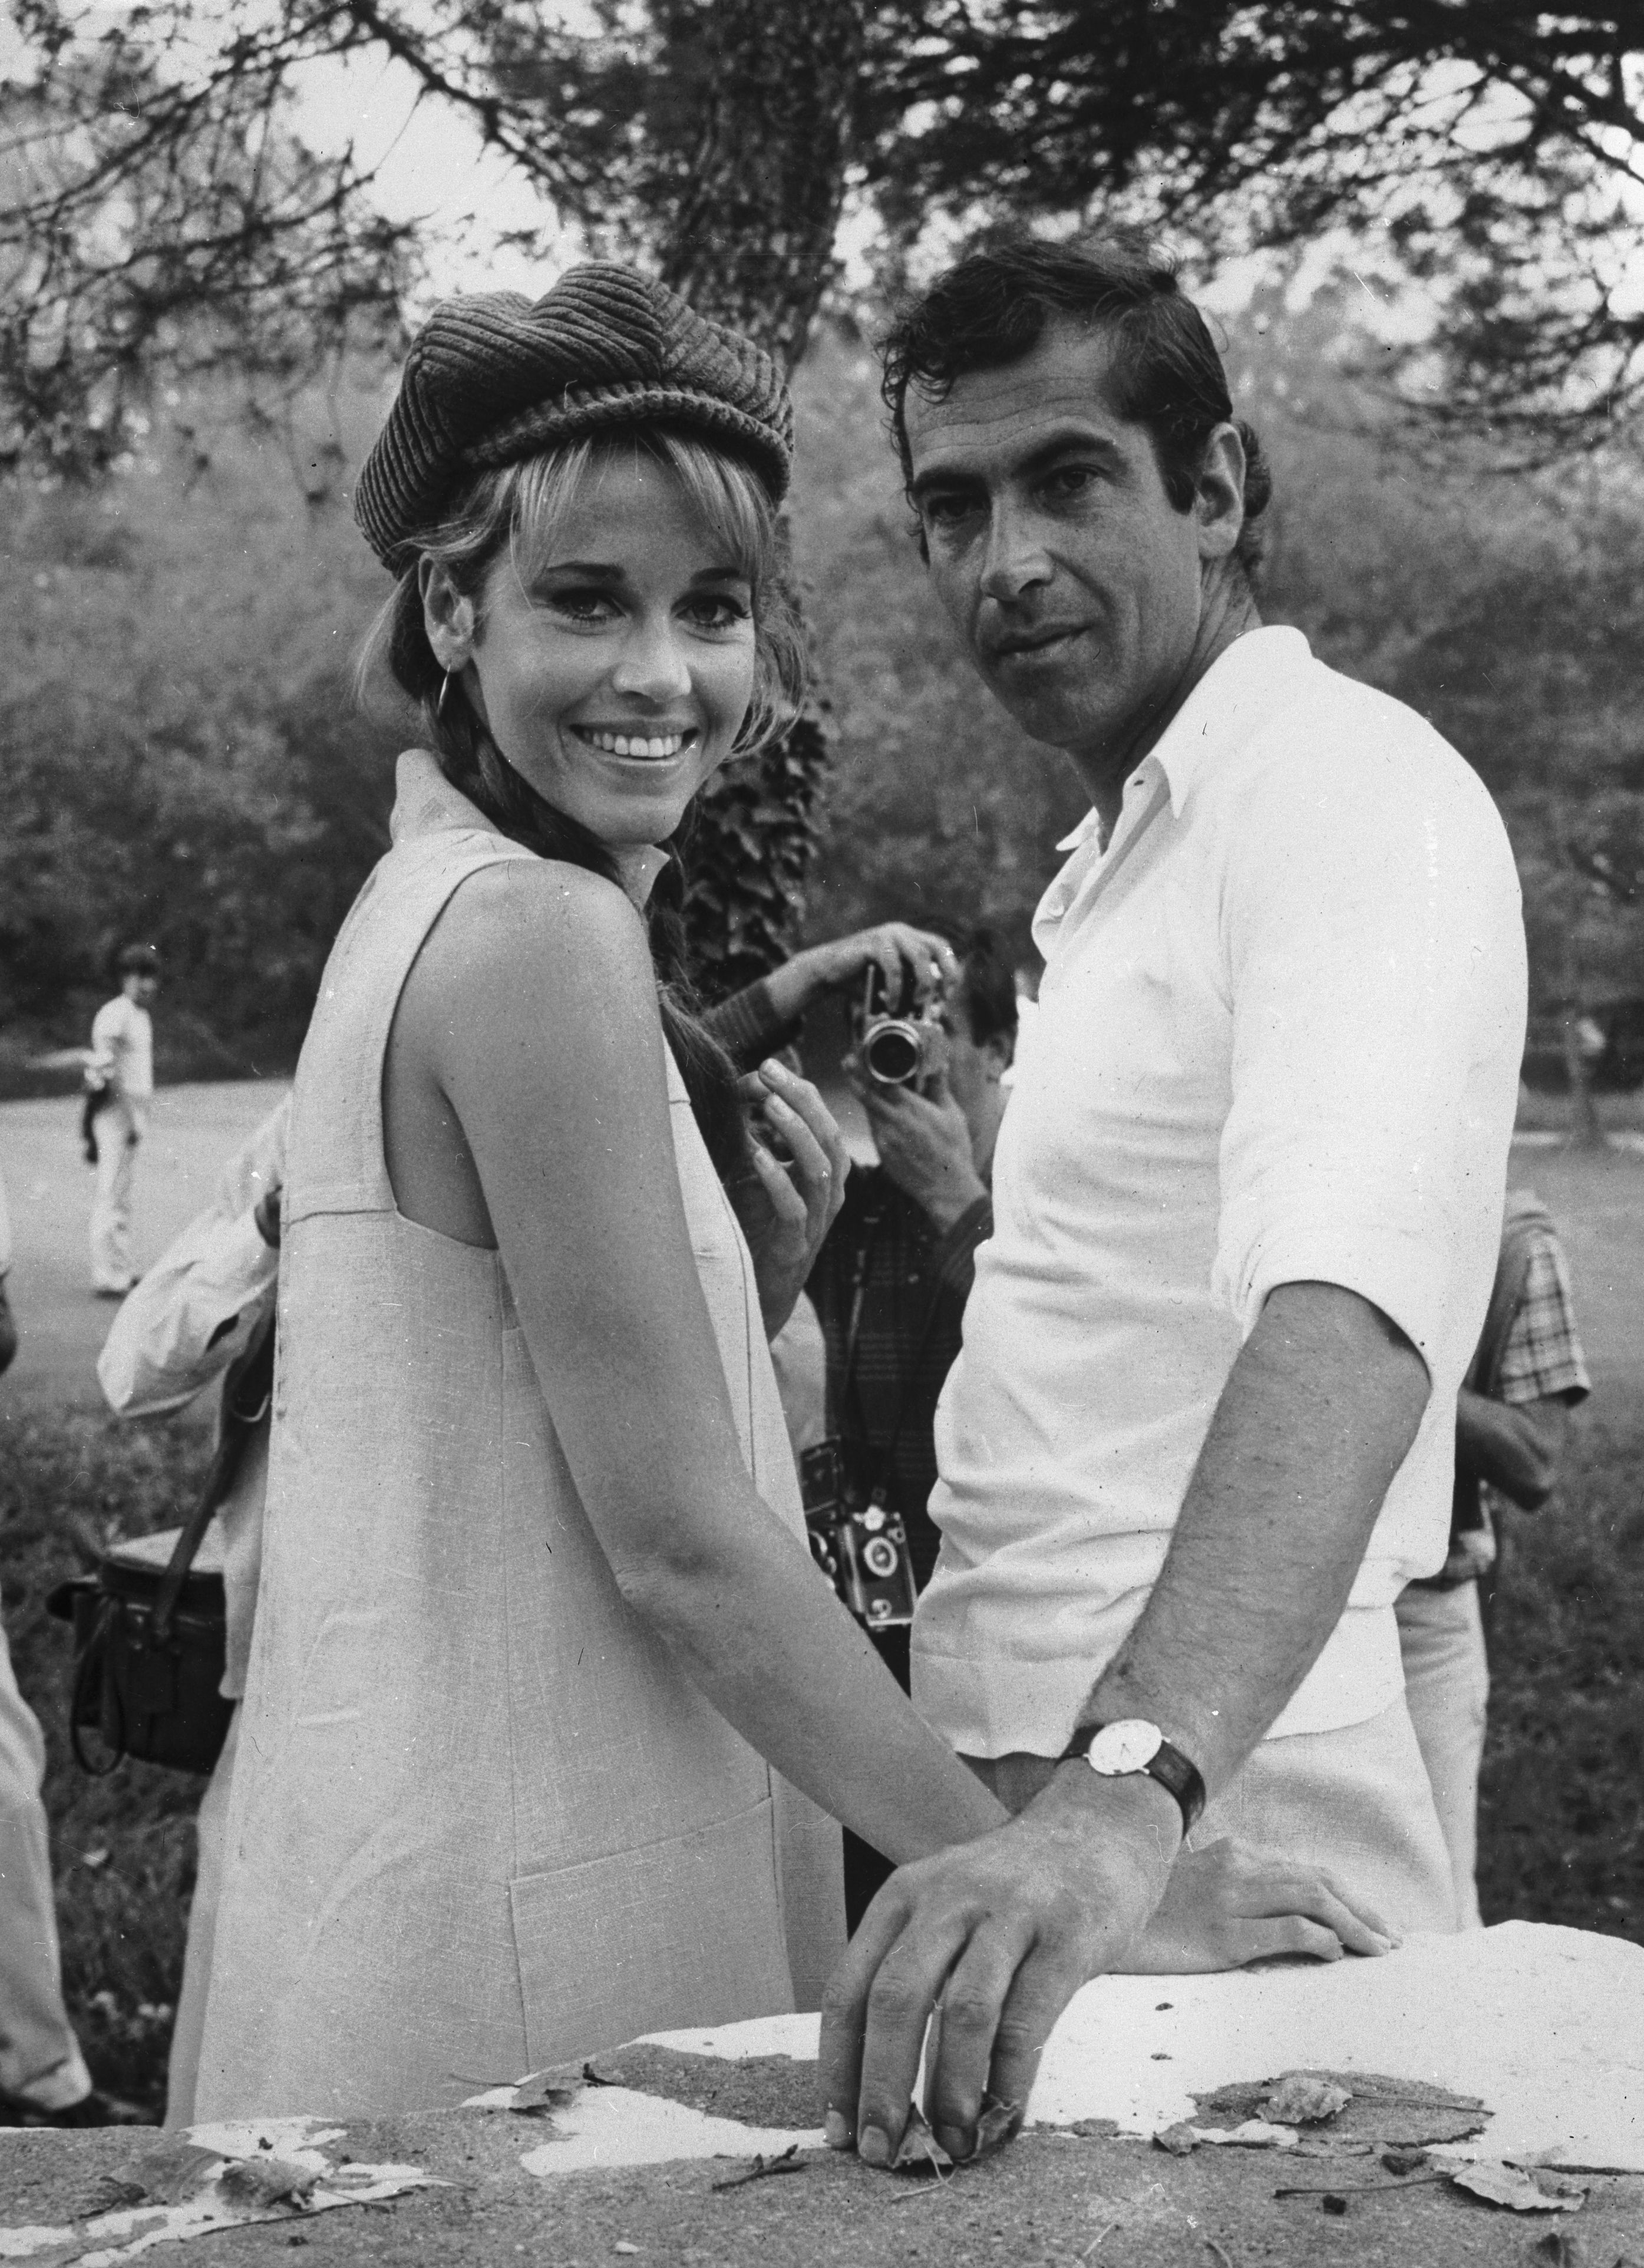 Jane Fonda and French film director Roger Vadim on October 1, 1966. | Source: Keystone Features/Getty Images